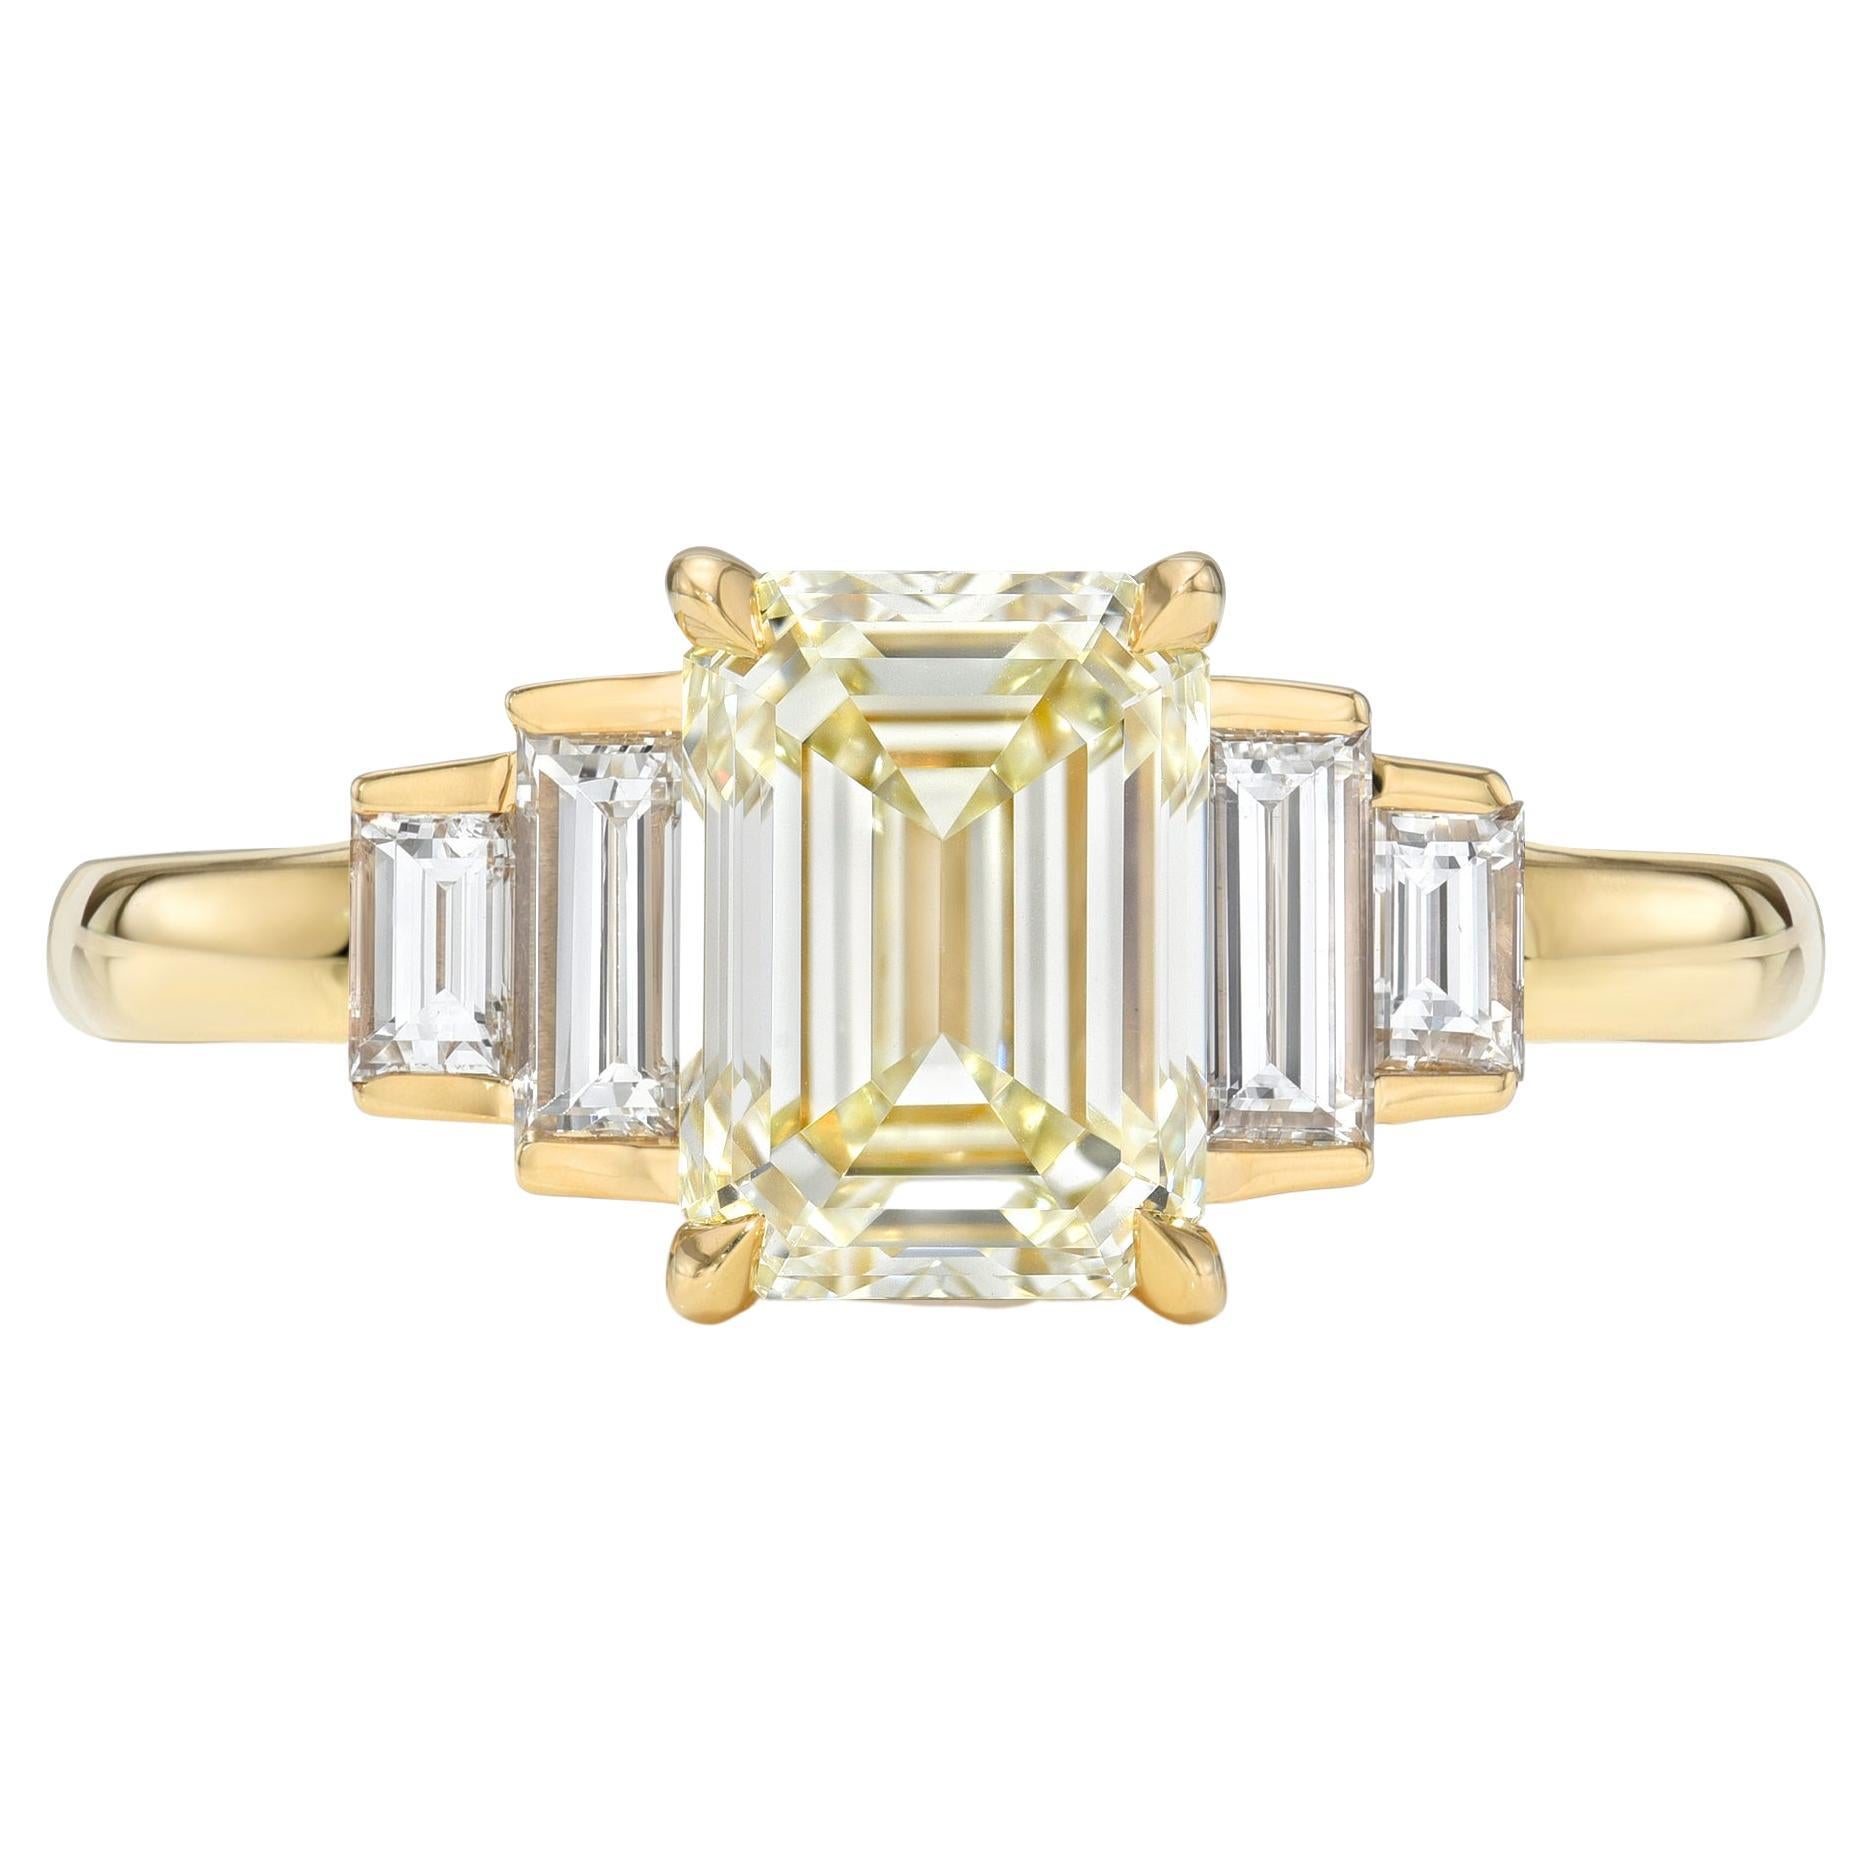 Handcrafted Caroline Emerald Cut Diamond Ring by Single Stone For Sale